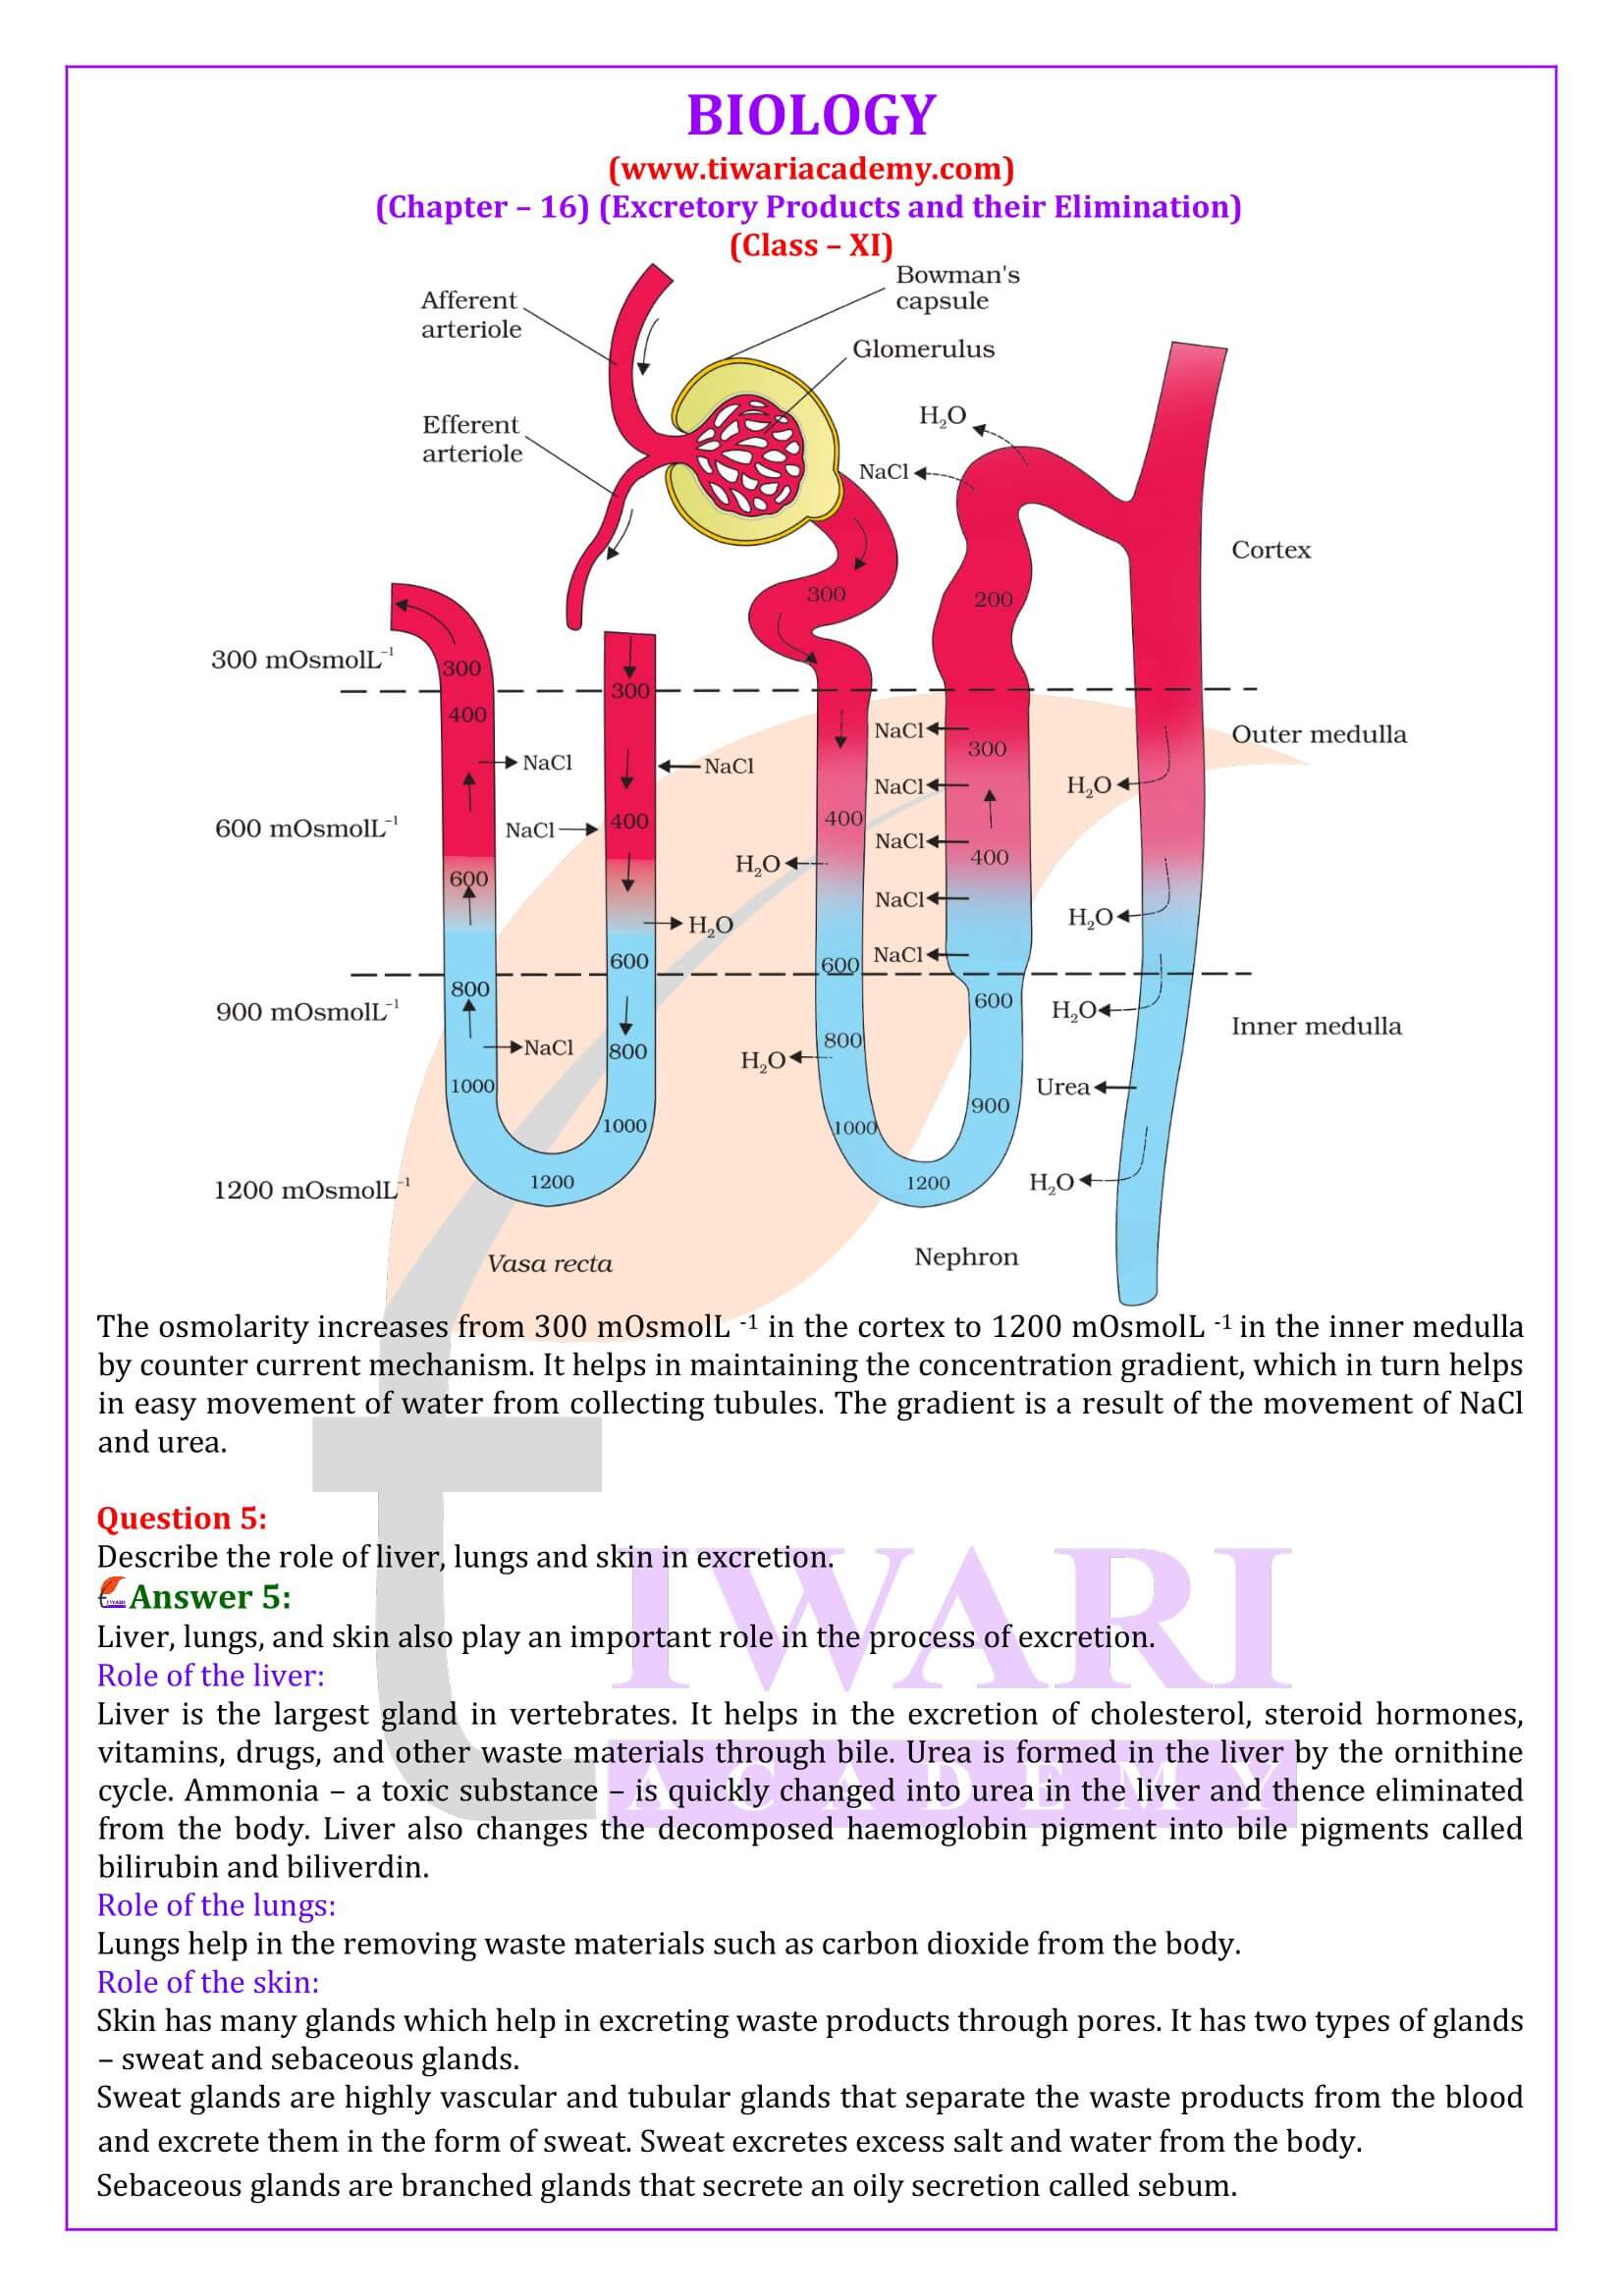 Class 11 Biology Chapter 16 Excretory Products and their Elimination